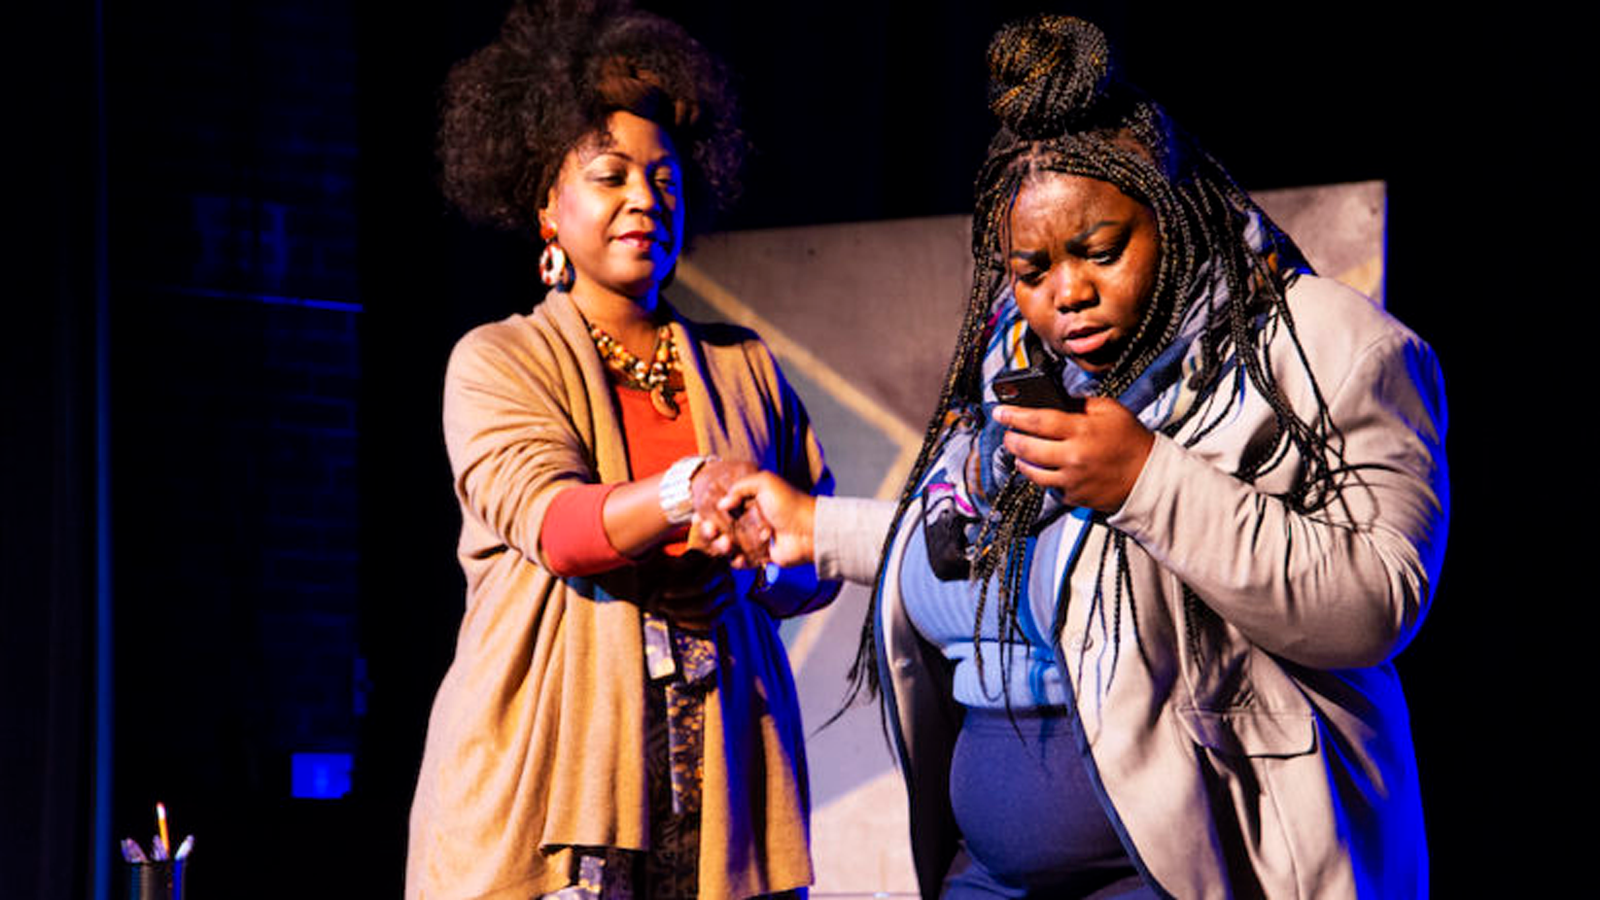 “Baltimore” is an exploration of historical trauma and the impact of racist denial